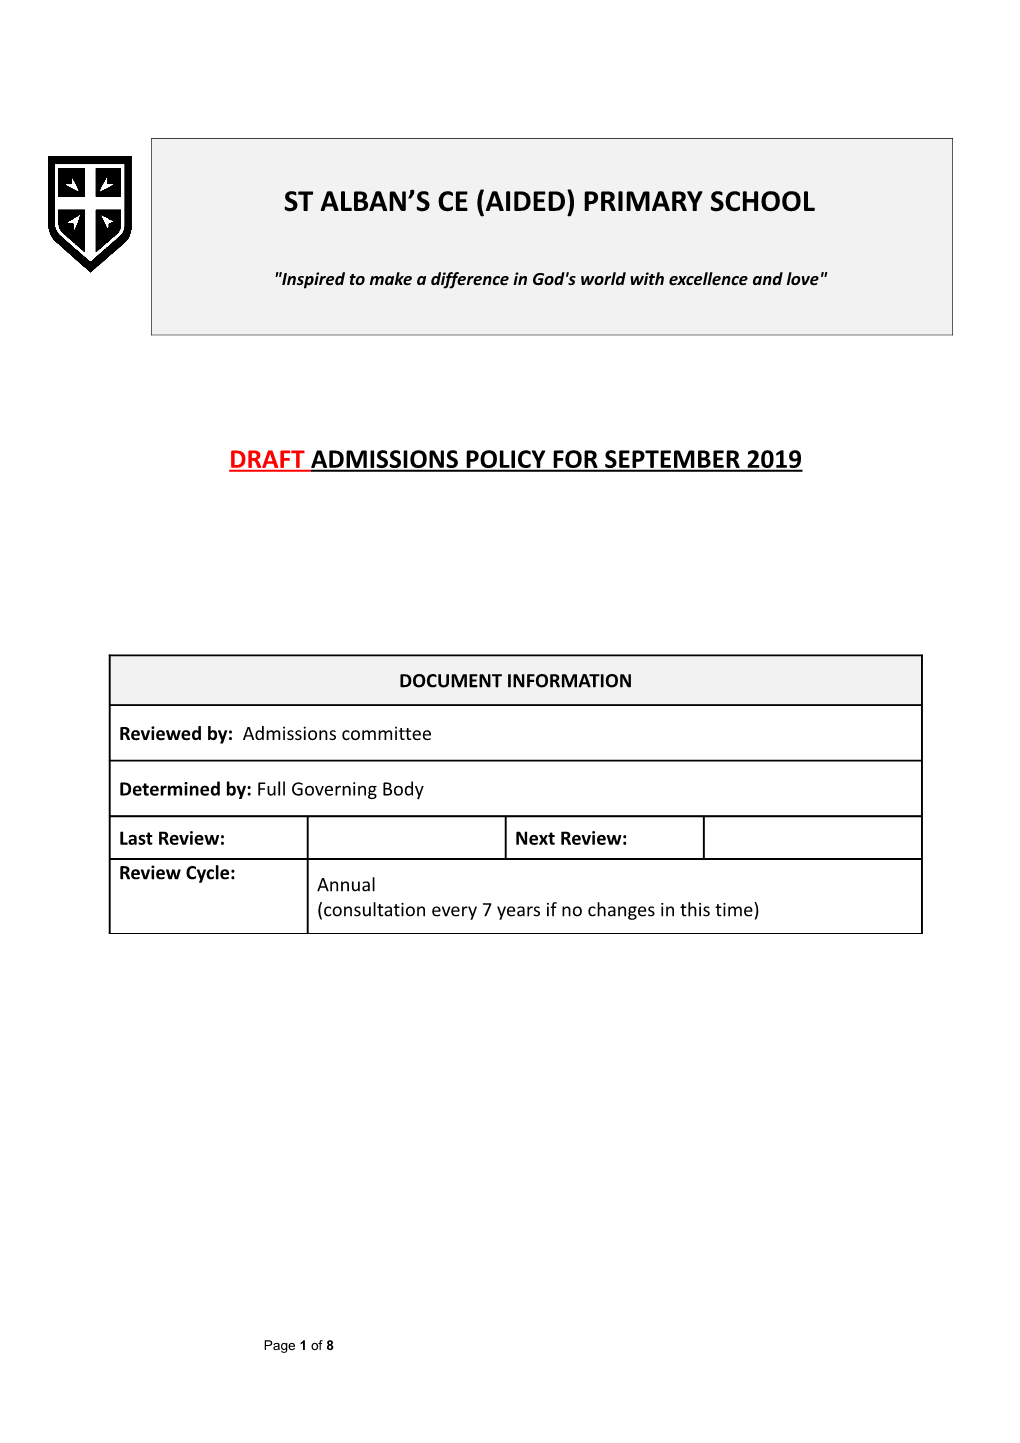 Admissions Policy for September 2014